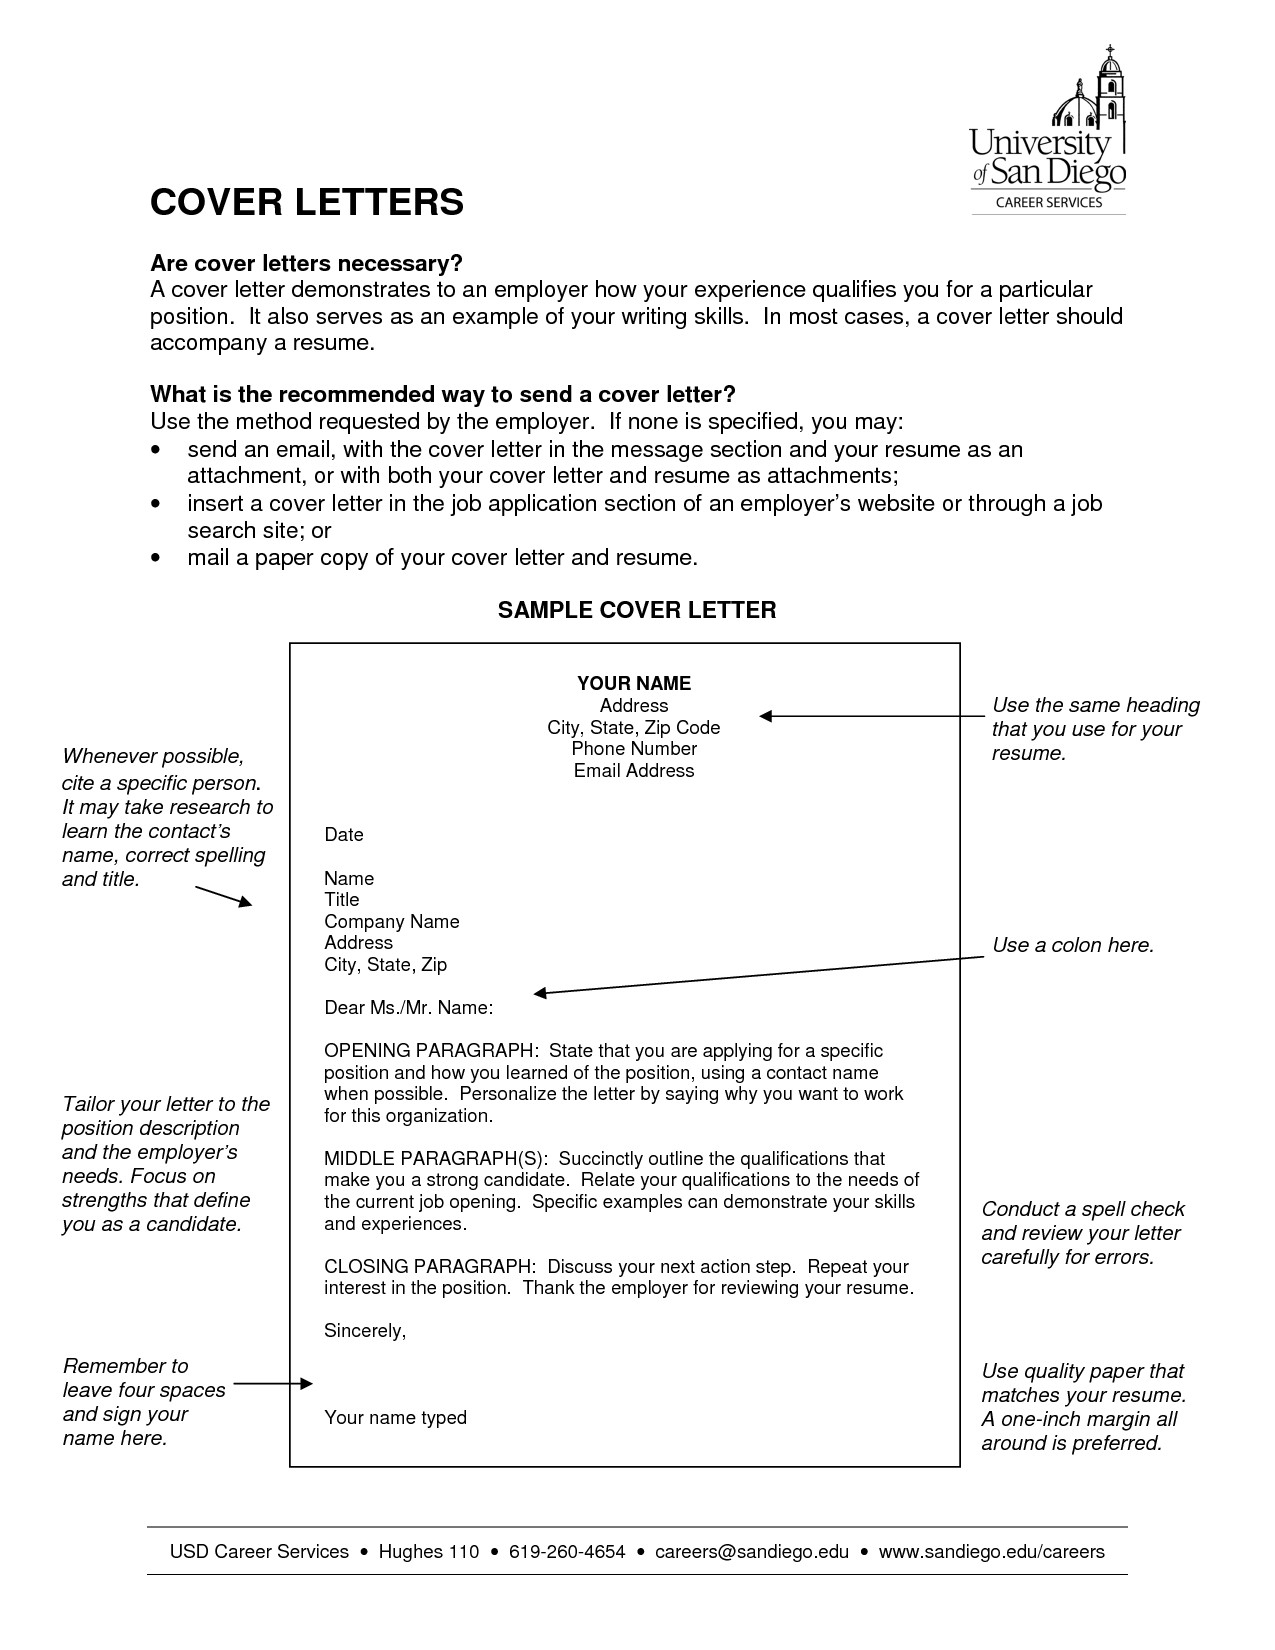 is a cover letter necessary for online application